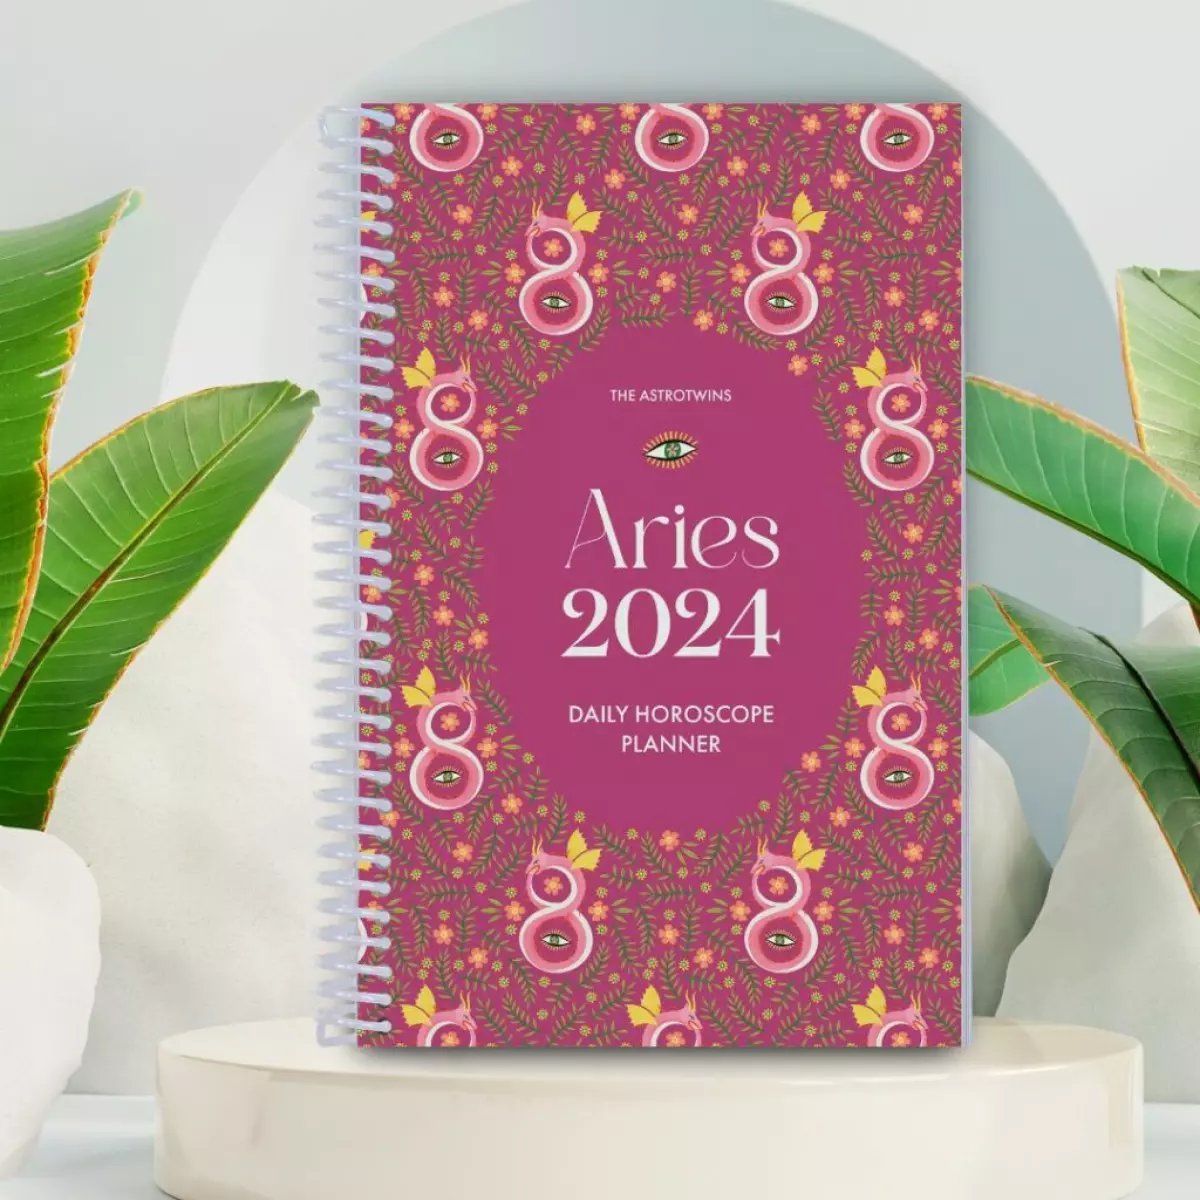 aries 2024 horoscope planner the astrotwins